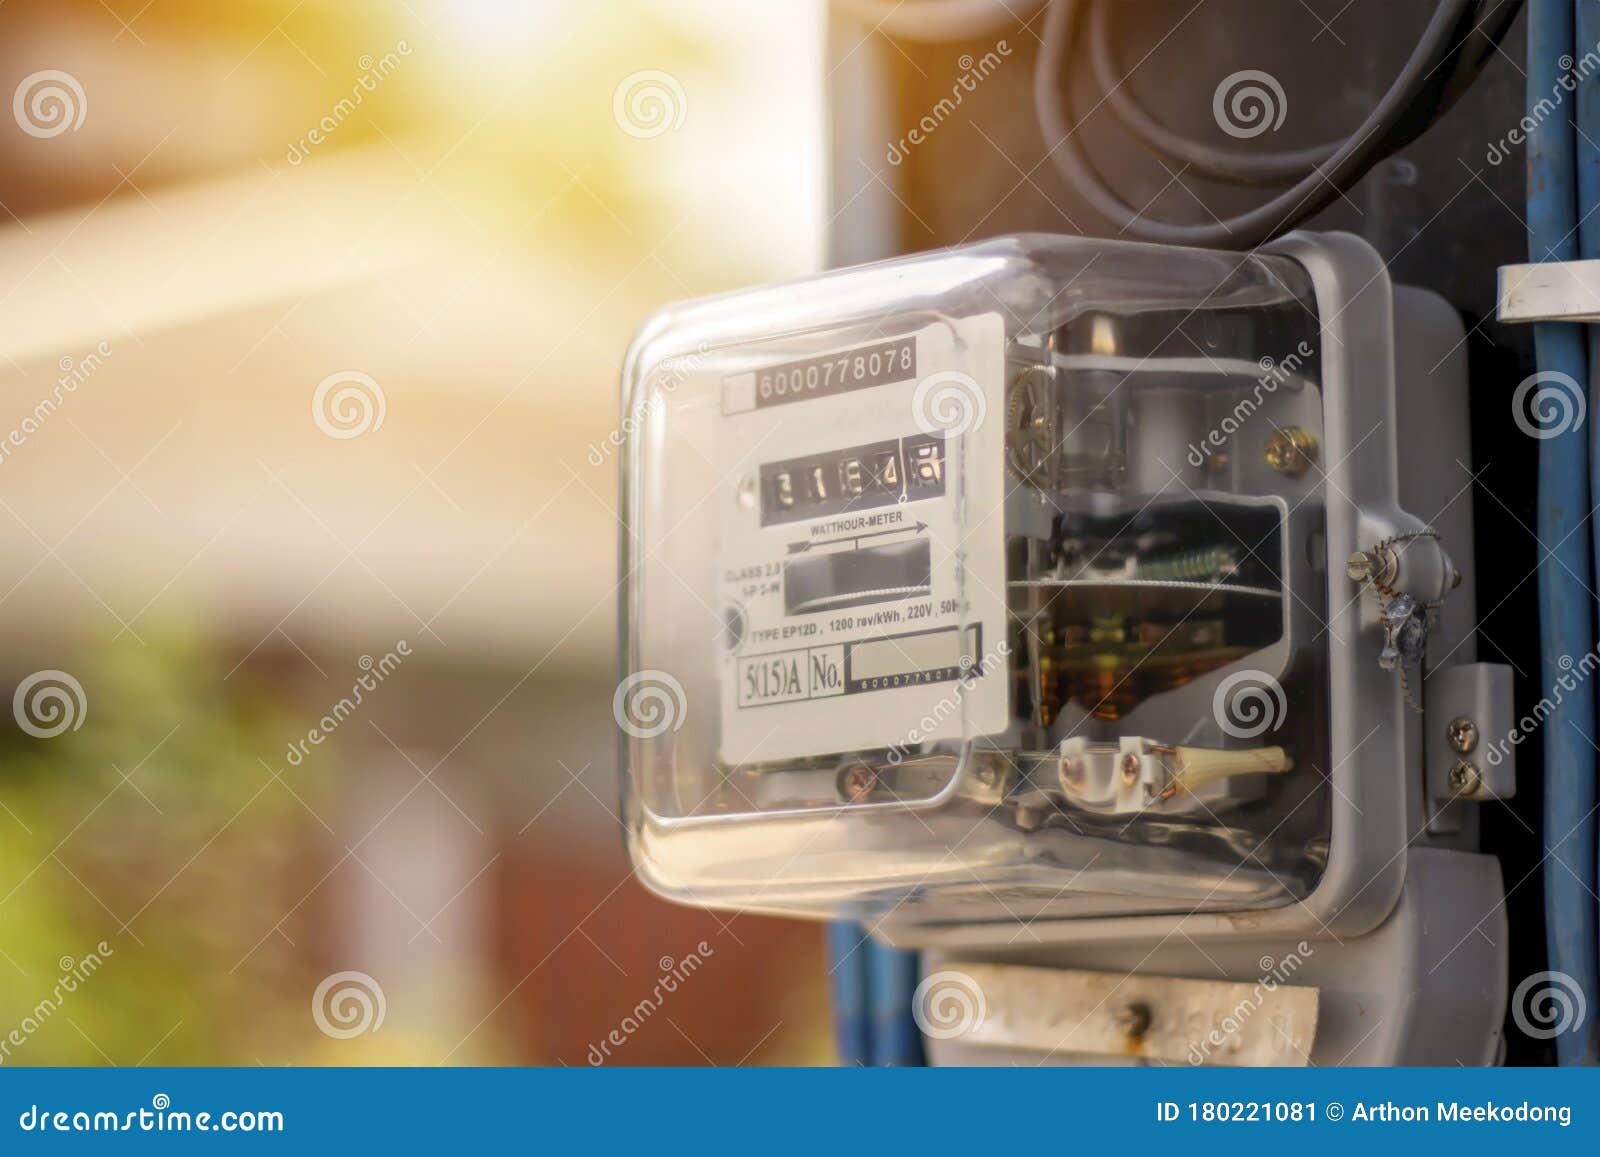 electricity meters for home electrical appliances, including blurred natural green backgrounds.